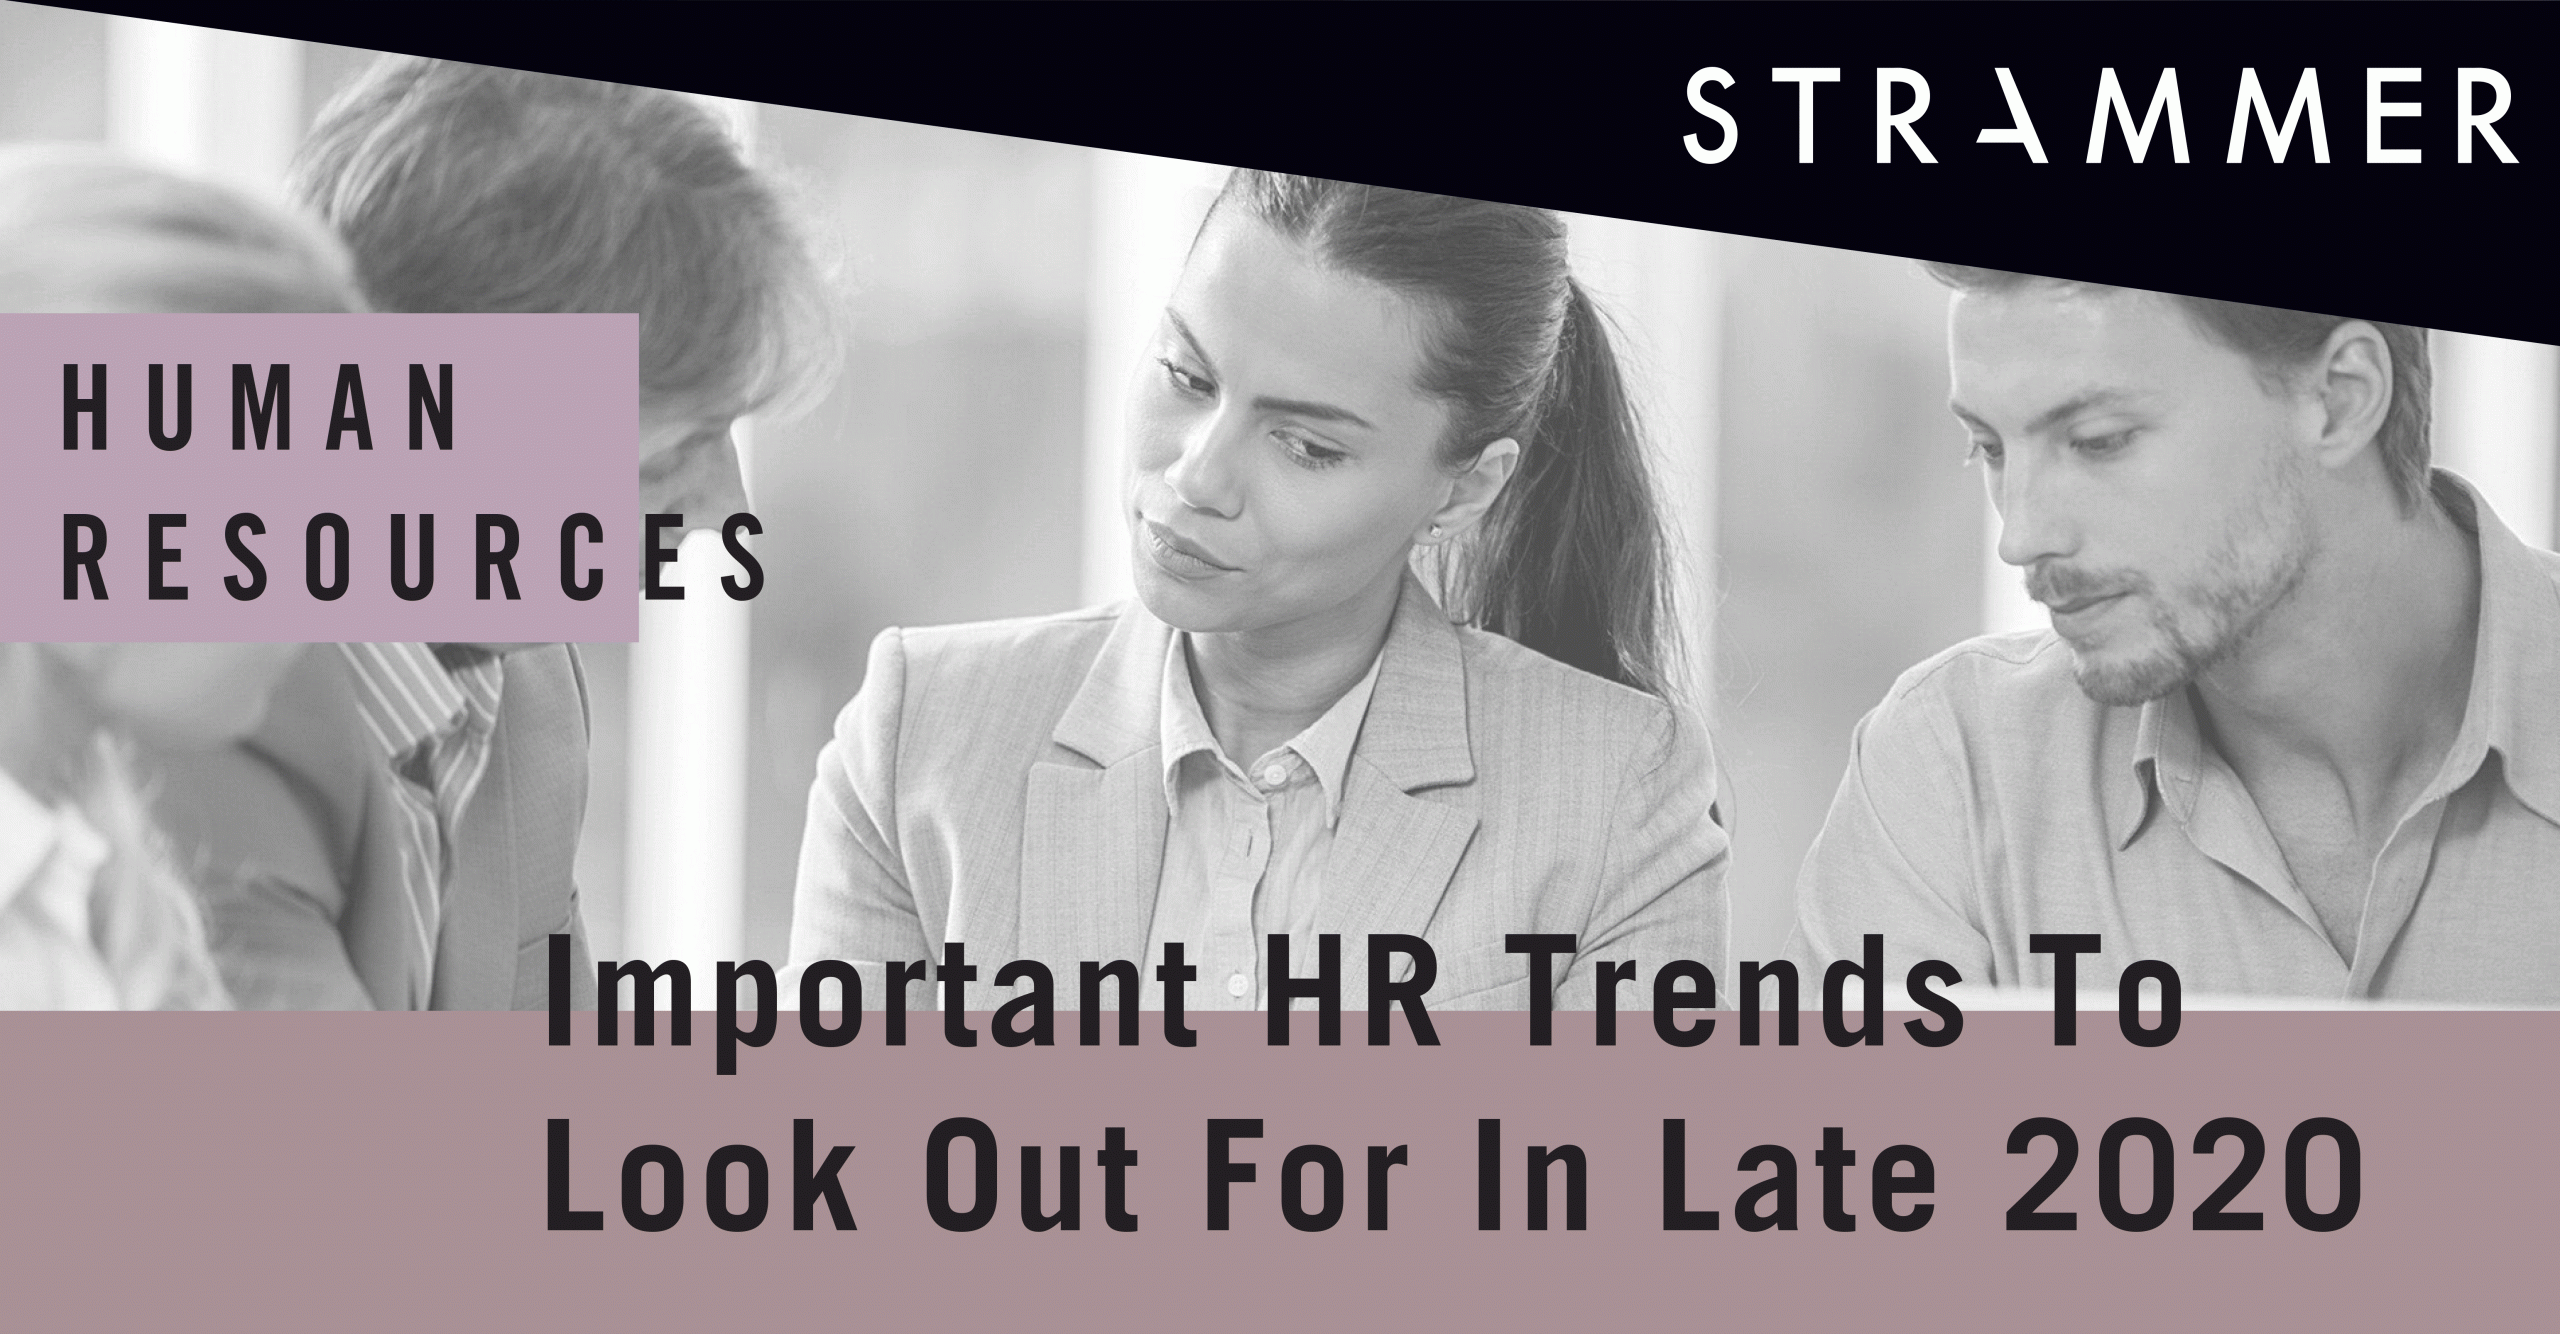 Human Resources Trends to Look Out For In Late 2020